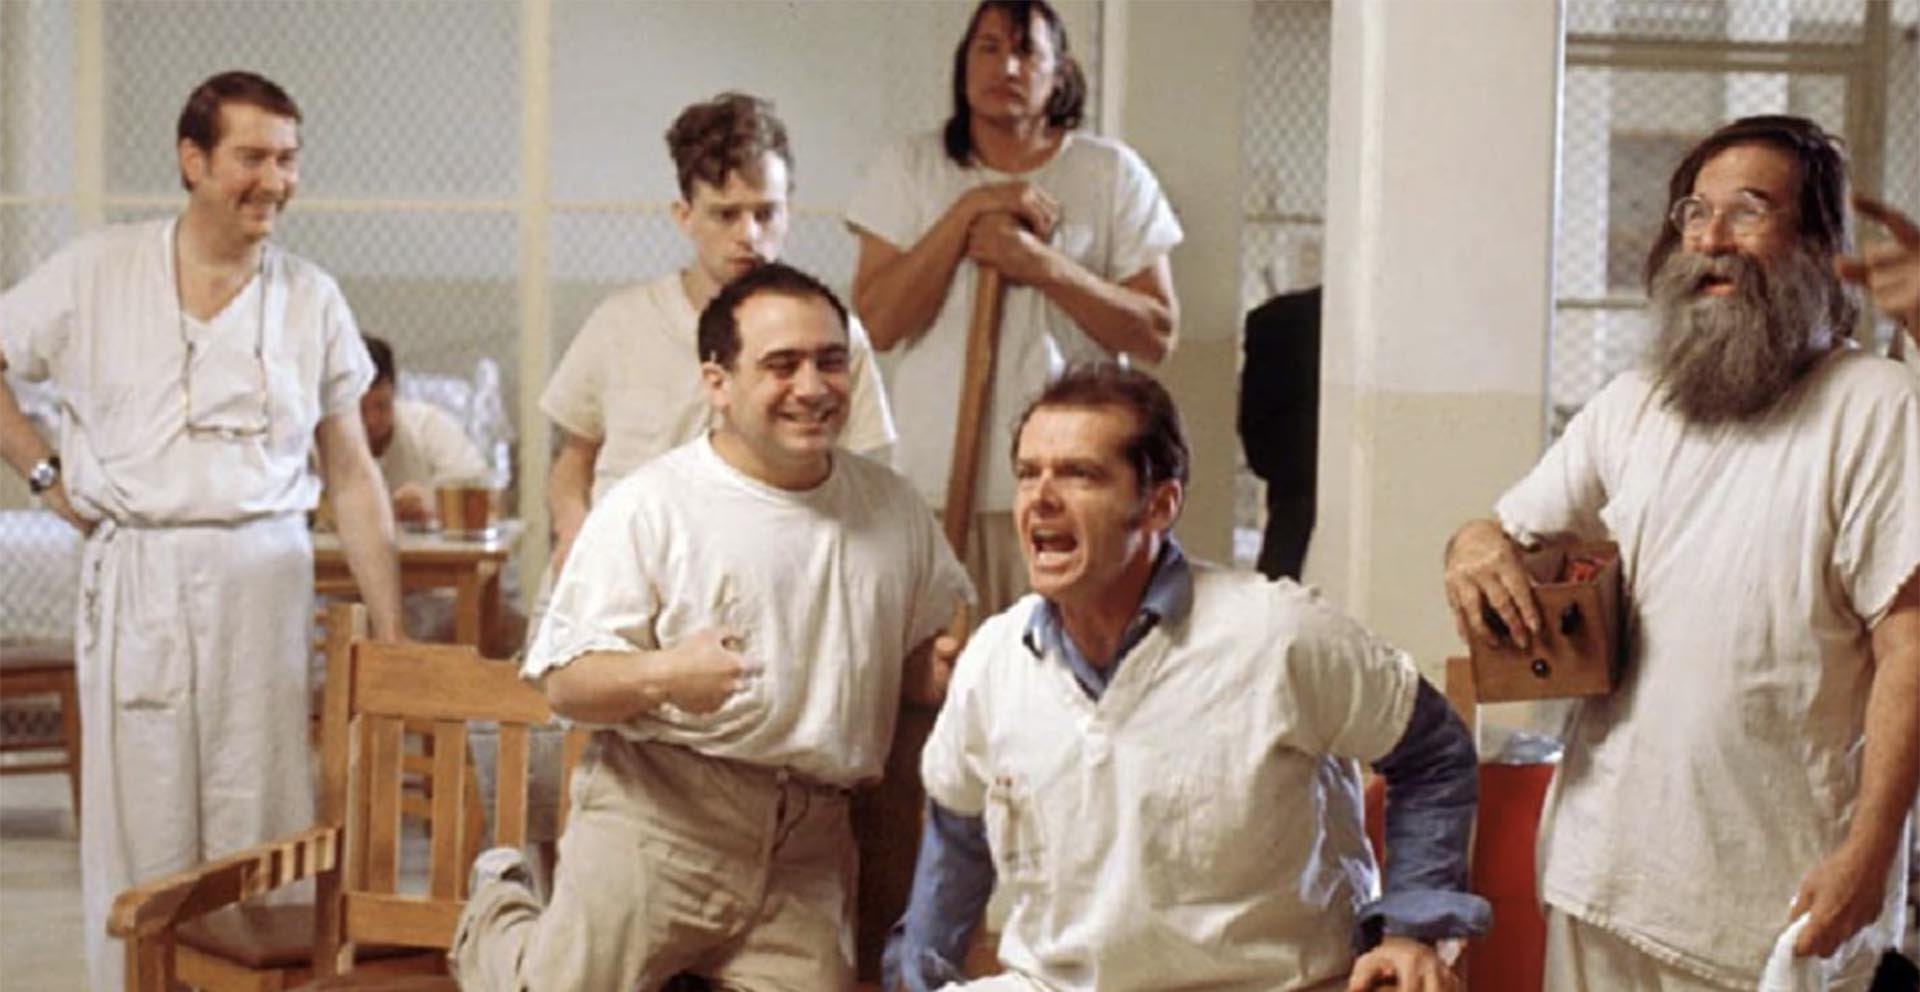 Still from "One Flew Over the Cuckoo's Nest"